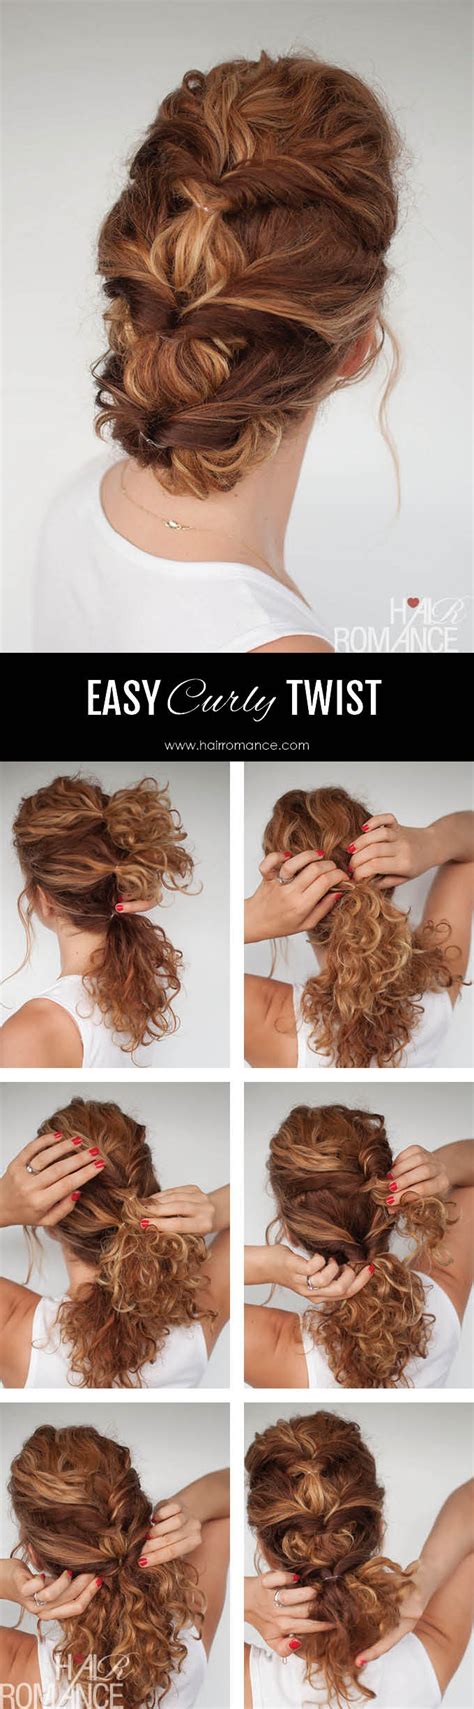 easy everyday curly hairstyle tutorial  curly twist